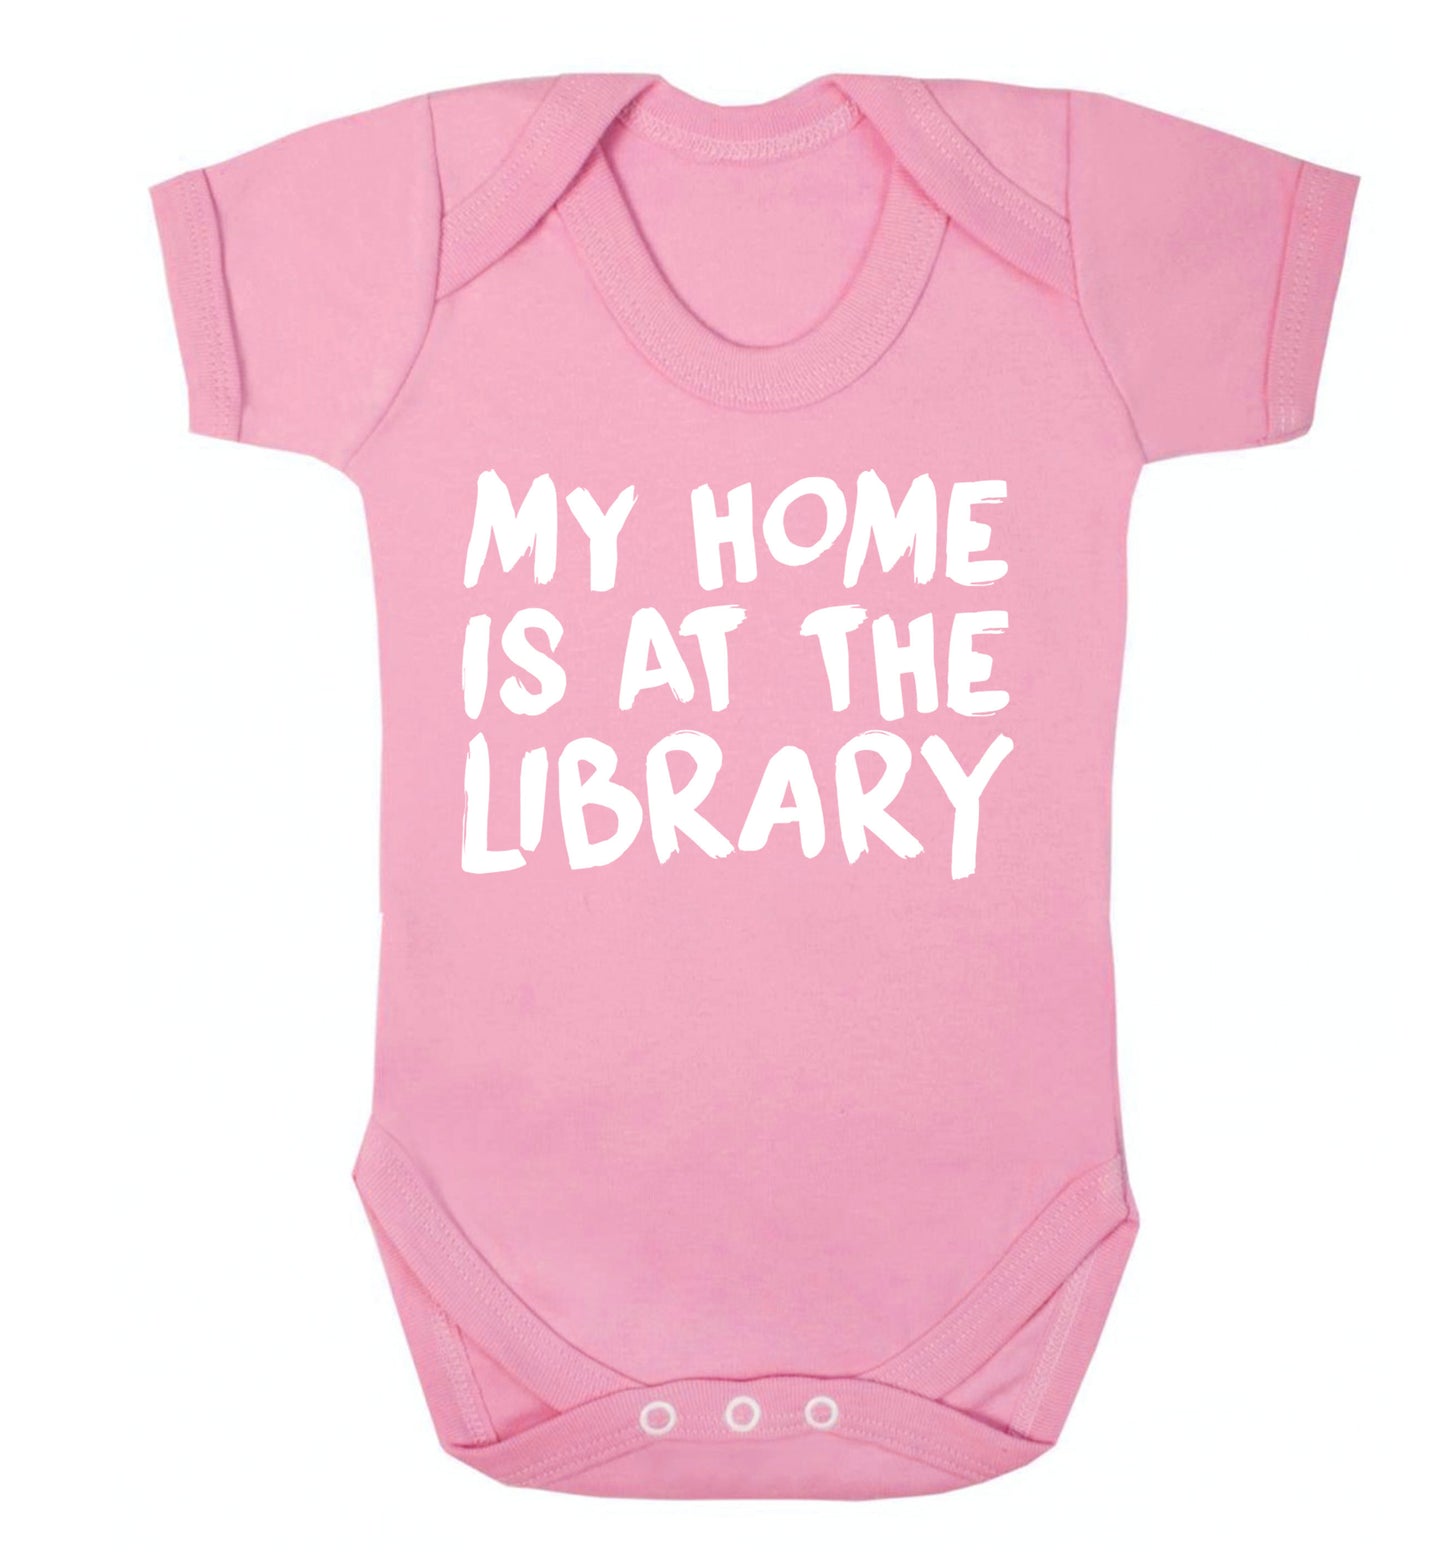 My home is at the library Baby Vest pale pink 18-24 months